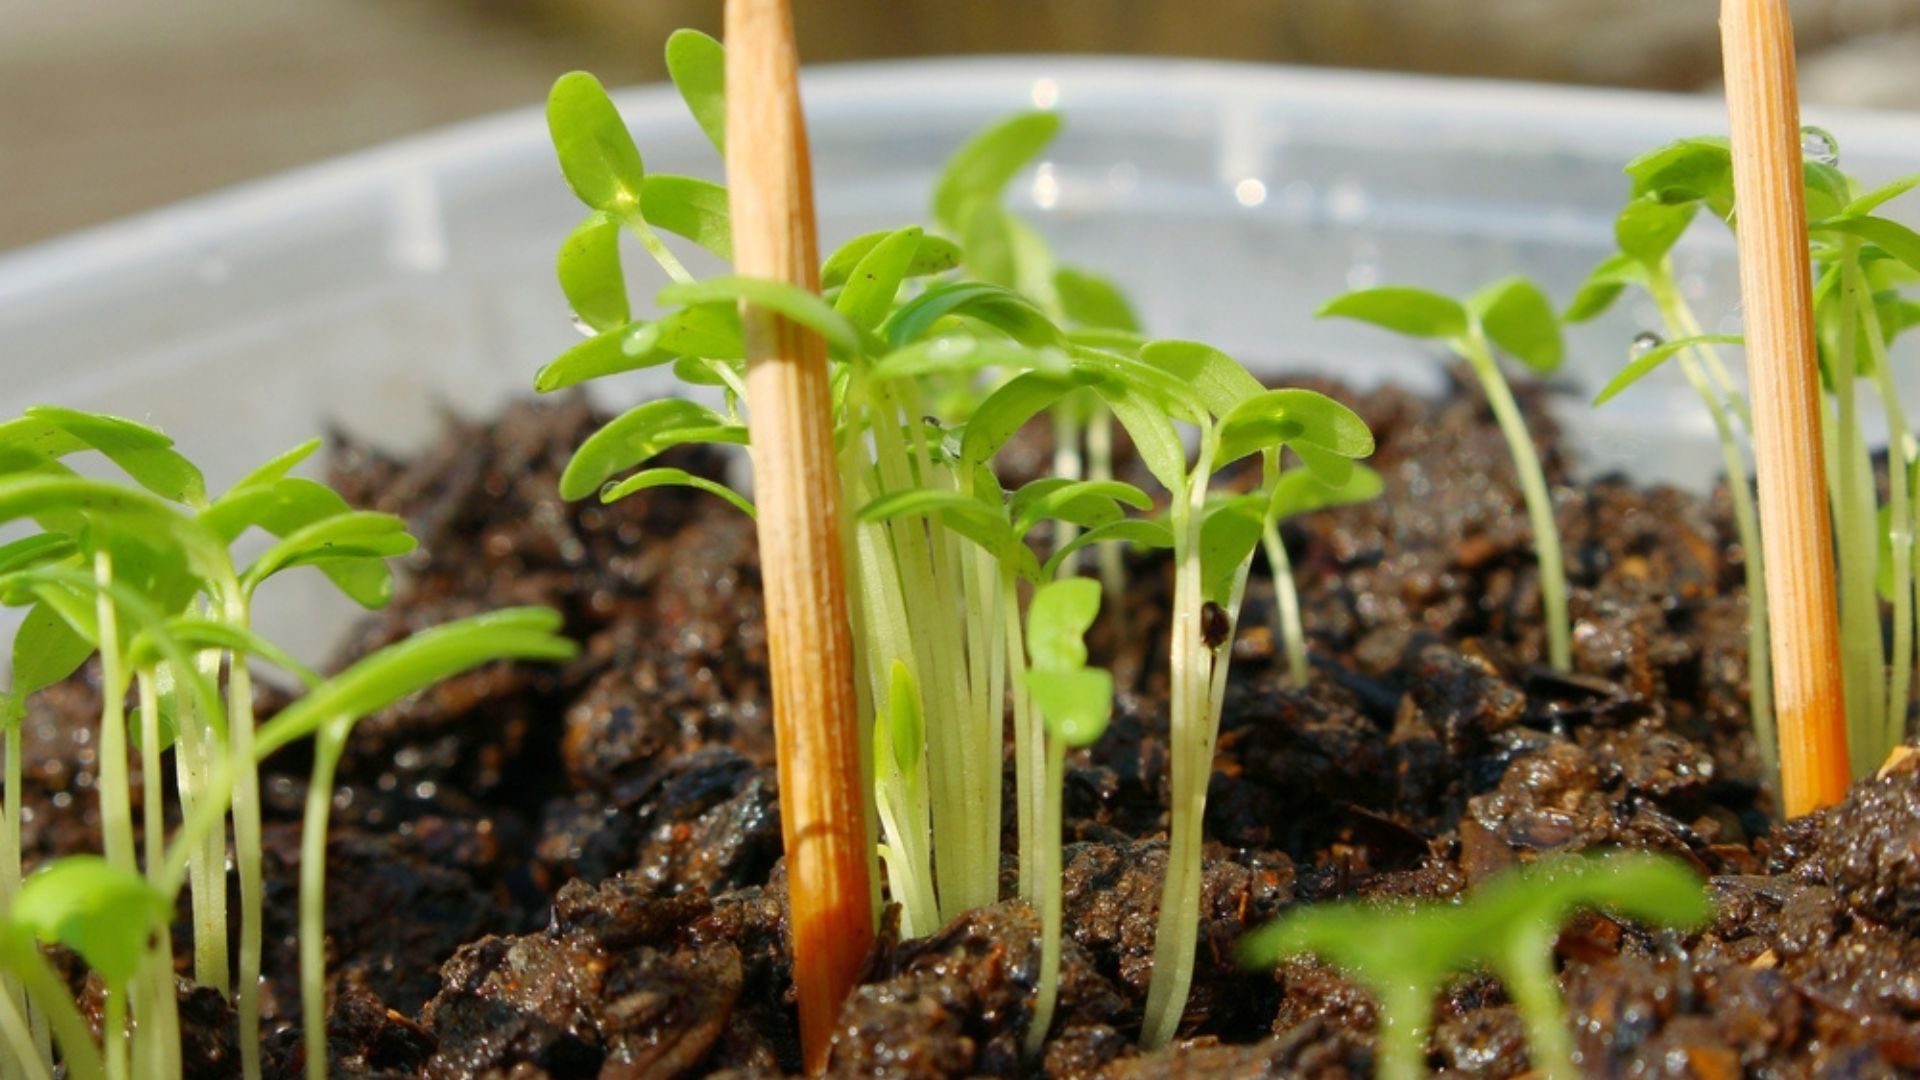 toothpick next to seedlings